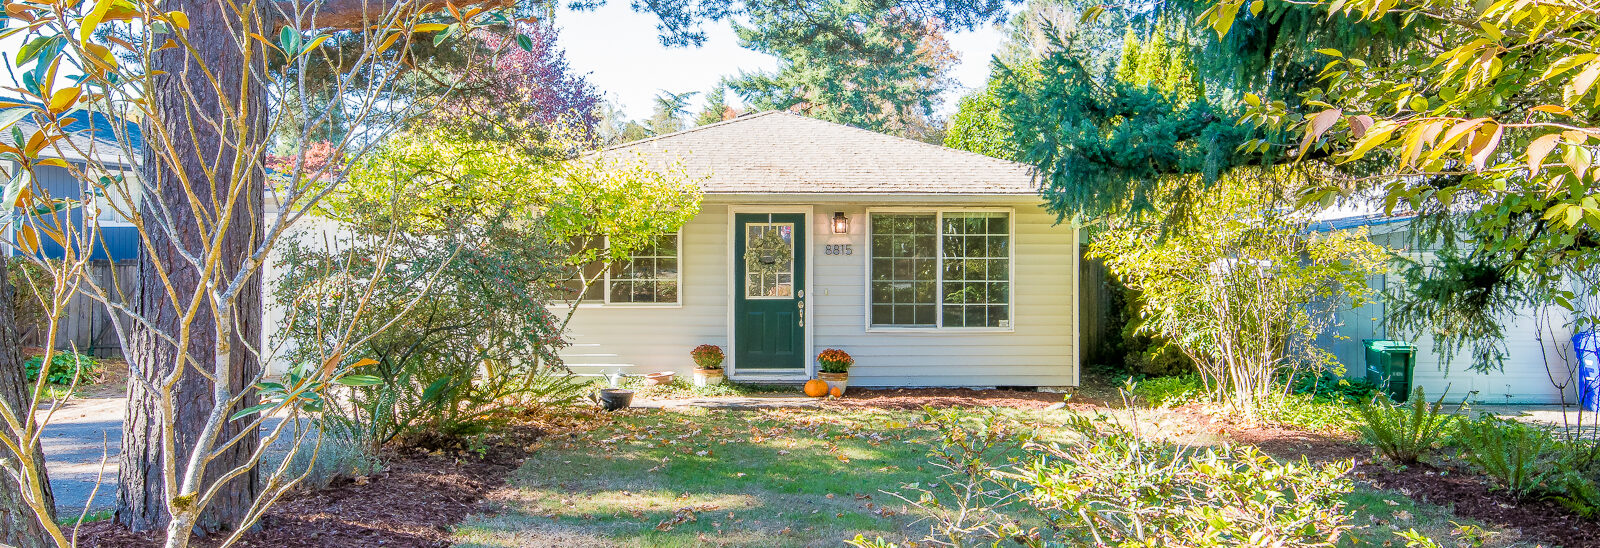 Just Listed! Quiet Garden Home Haven